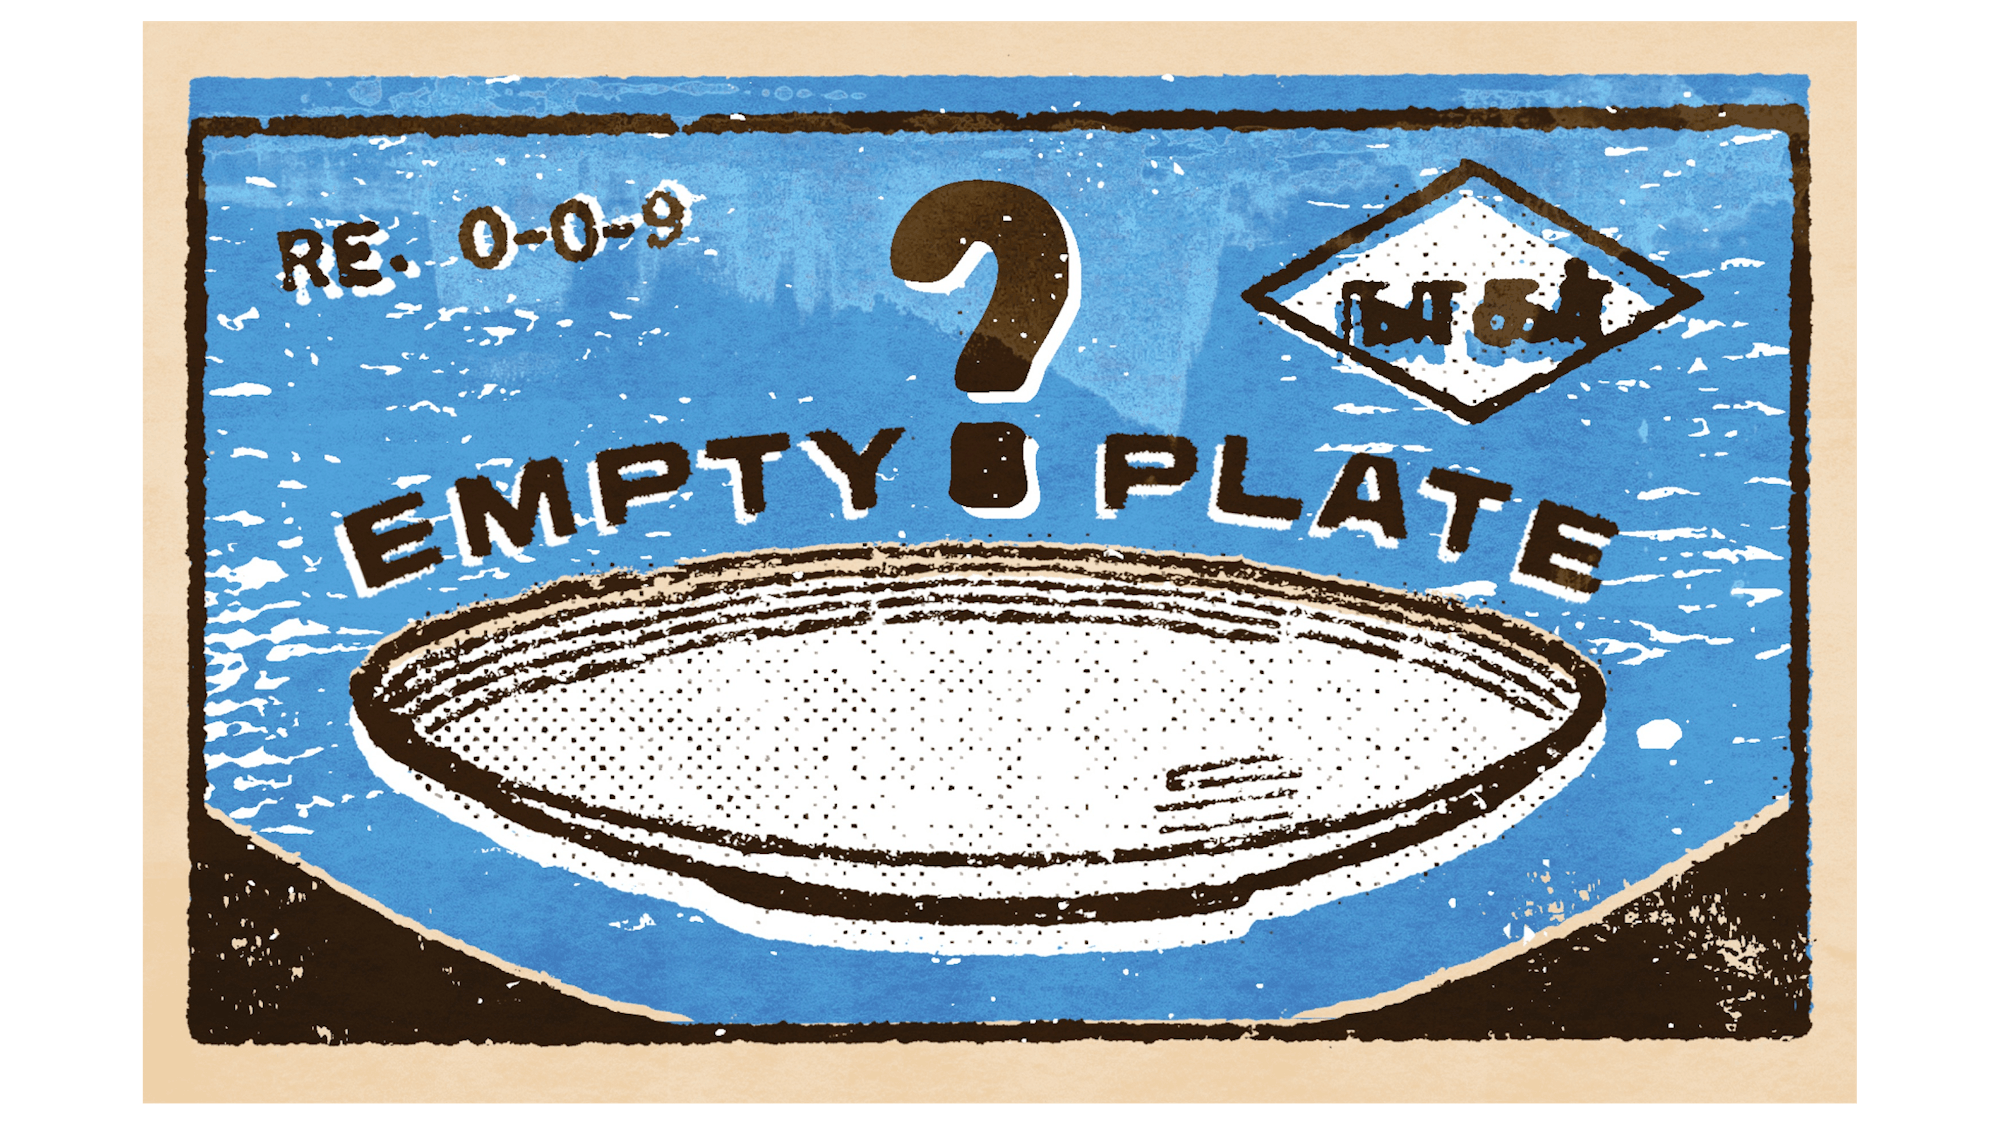 A vintage image of an empty plate with the words ‘empty plate,’ a question mark, and a white diamond shape. The image is mainly blue, with white and black detailing.